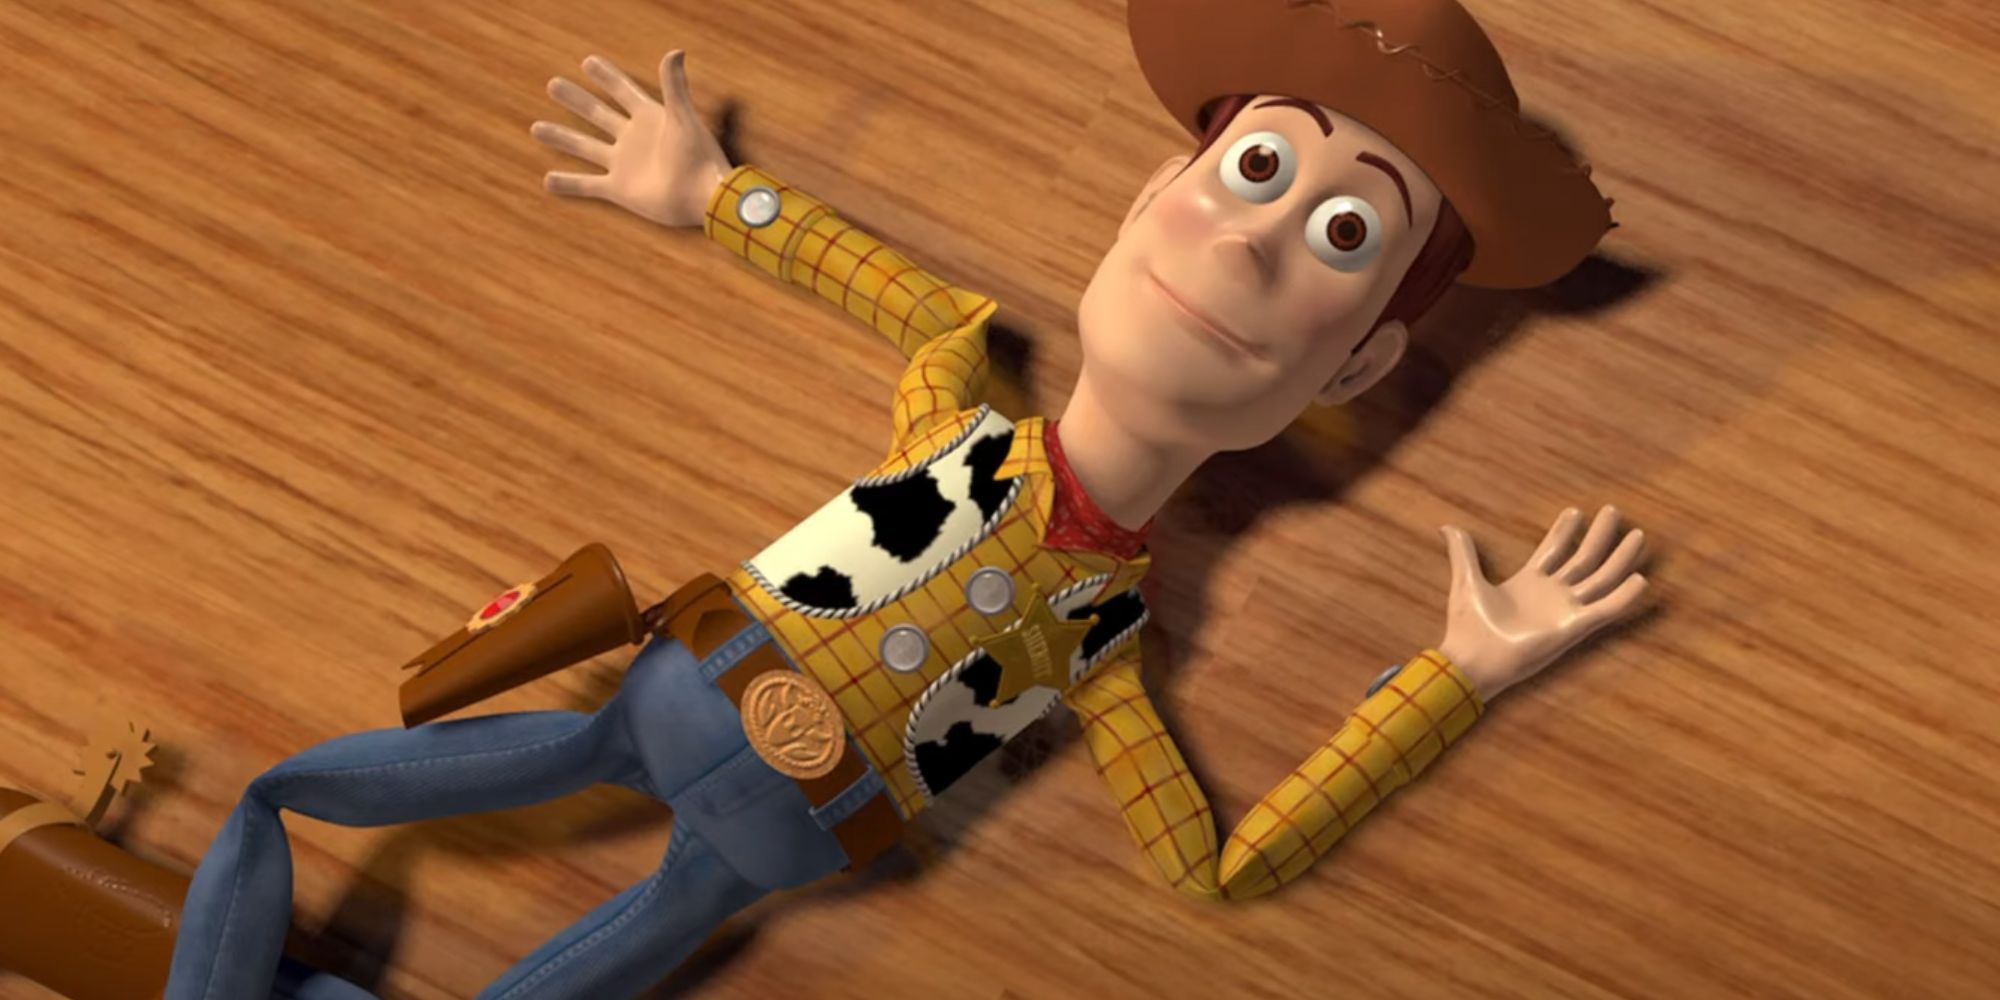 Woody lying limply on the floor in Toy Story